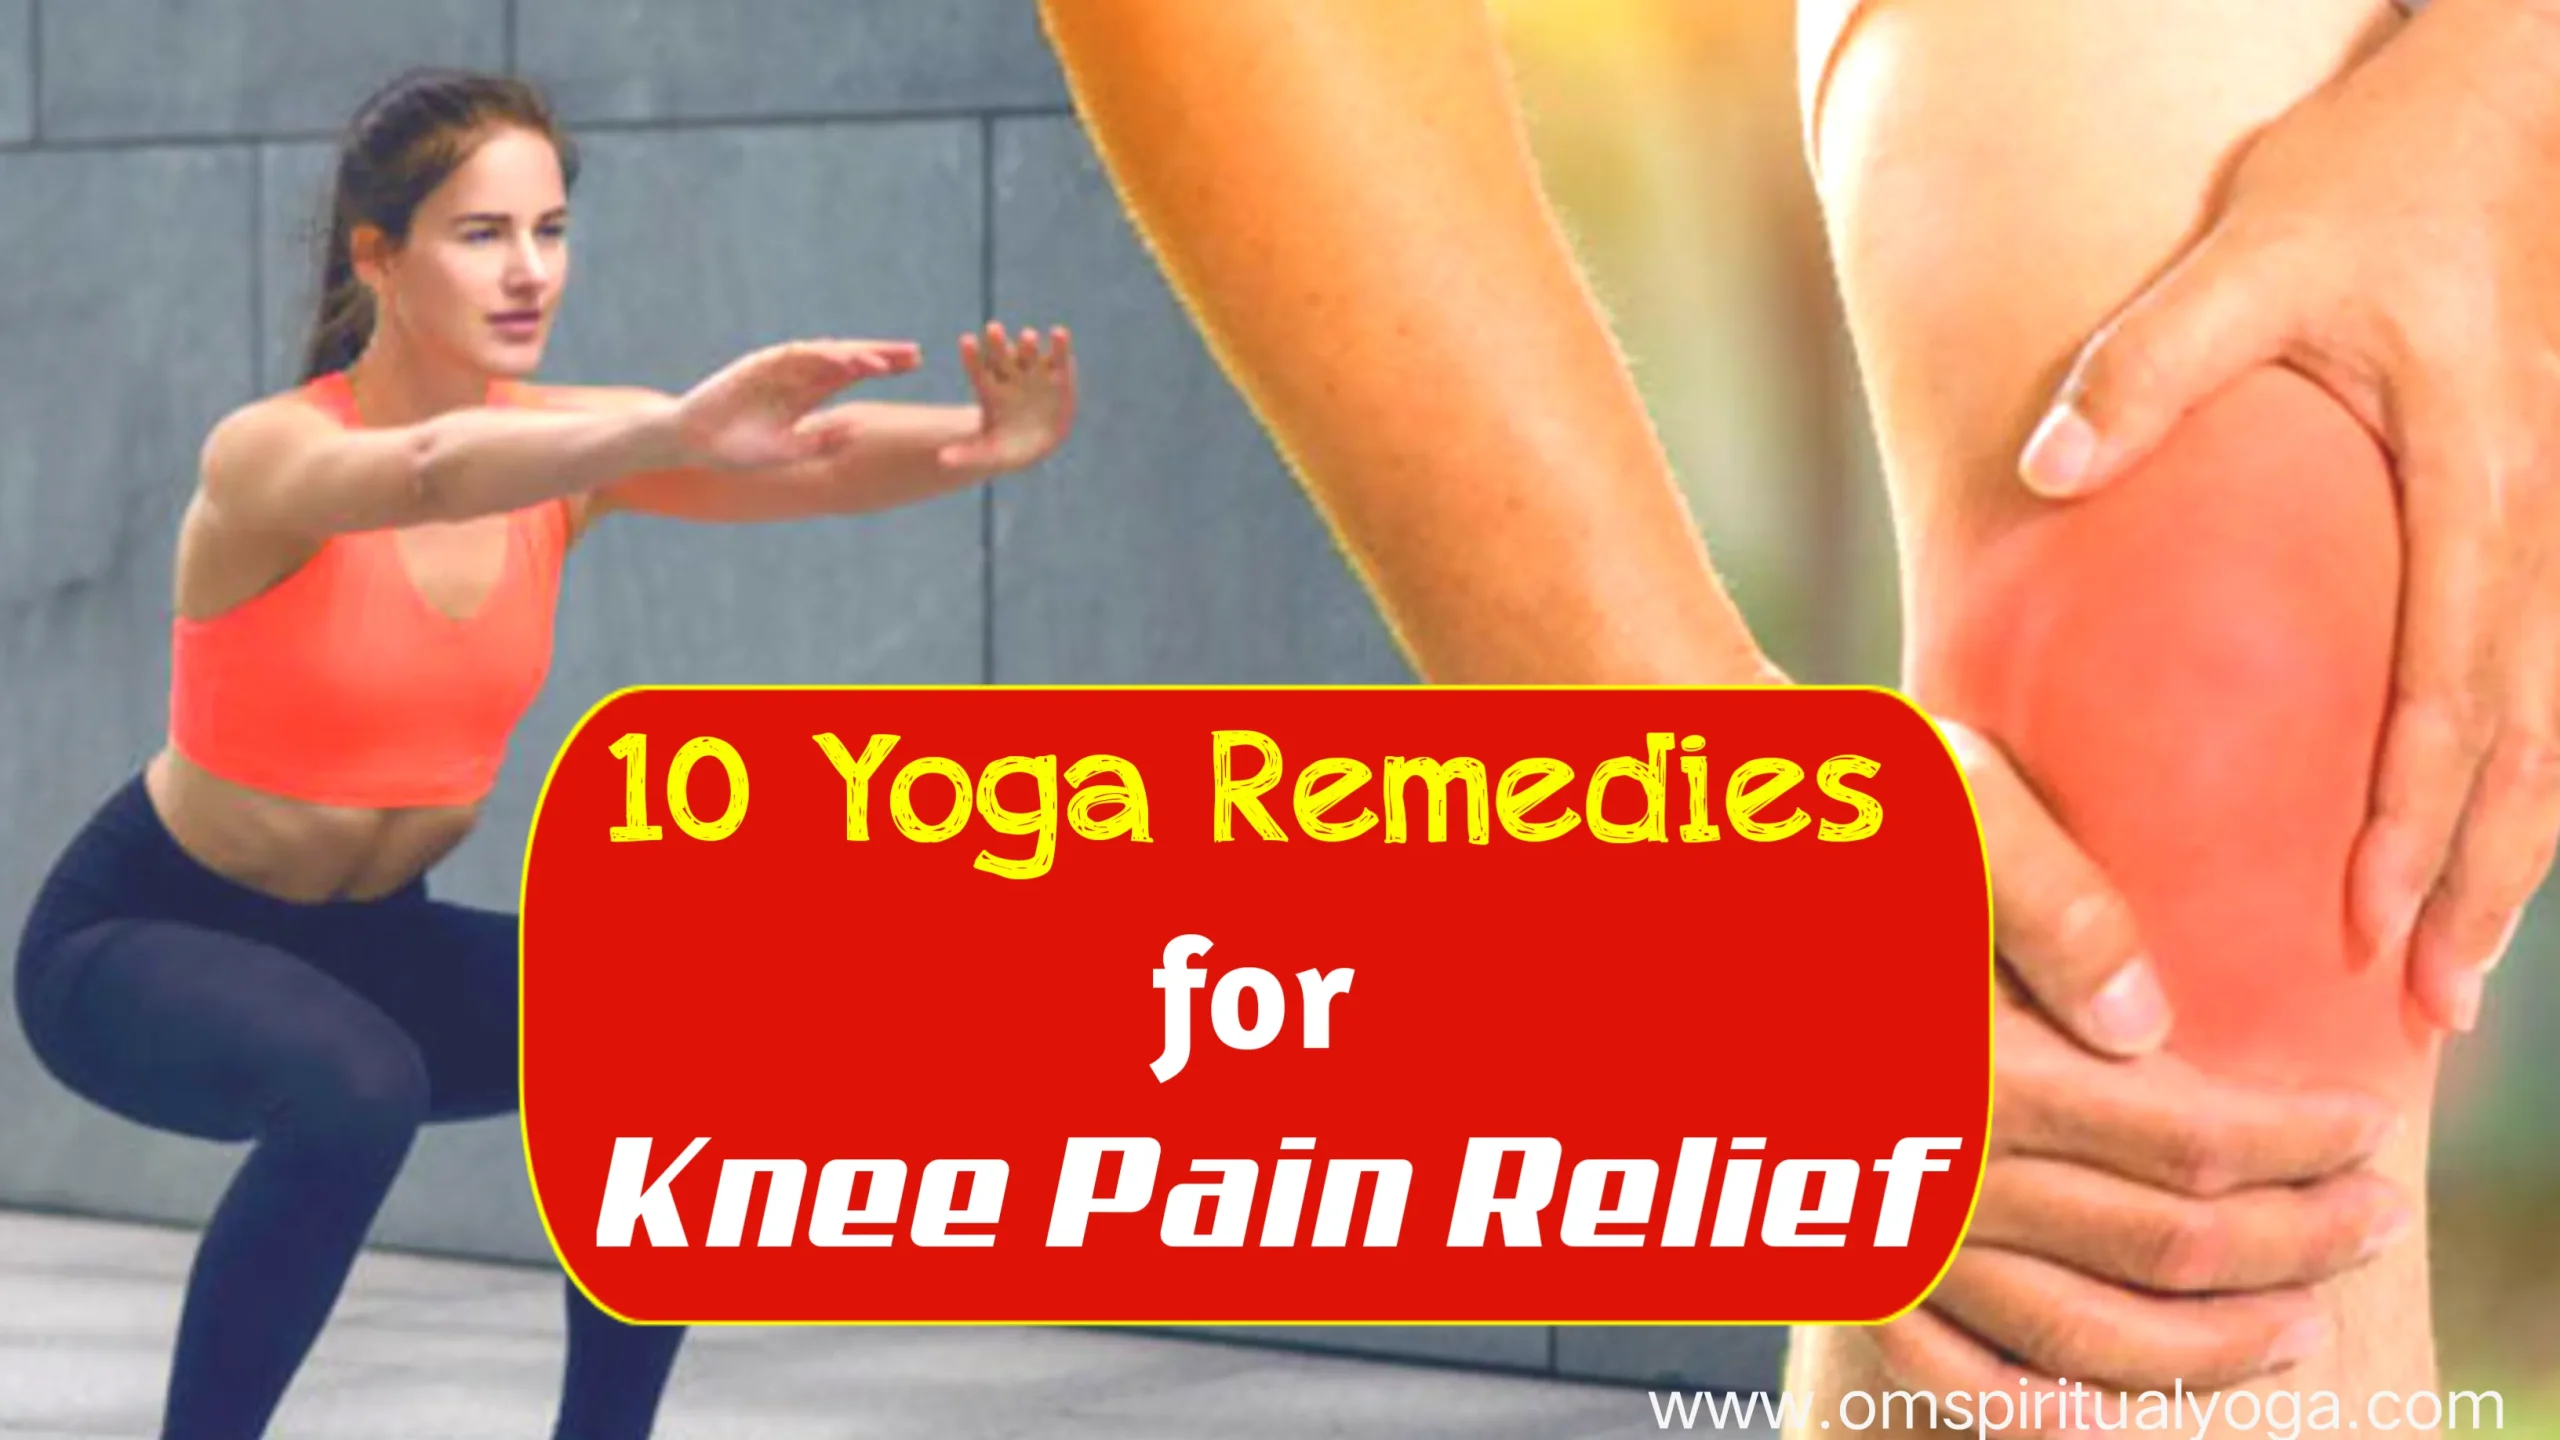 10 Yoga Remedies For Knee Pain Relief